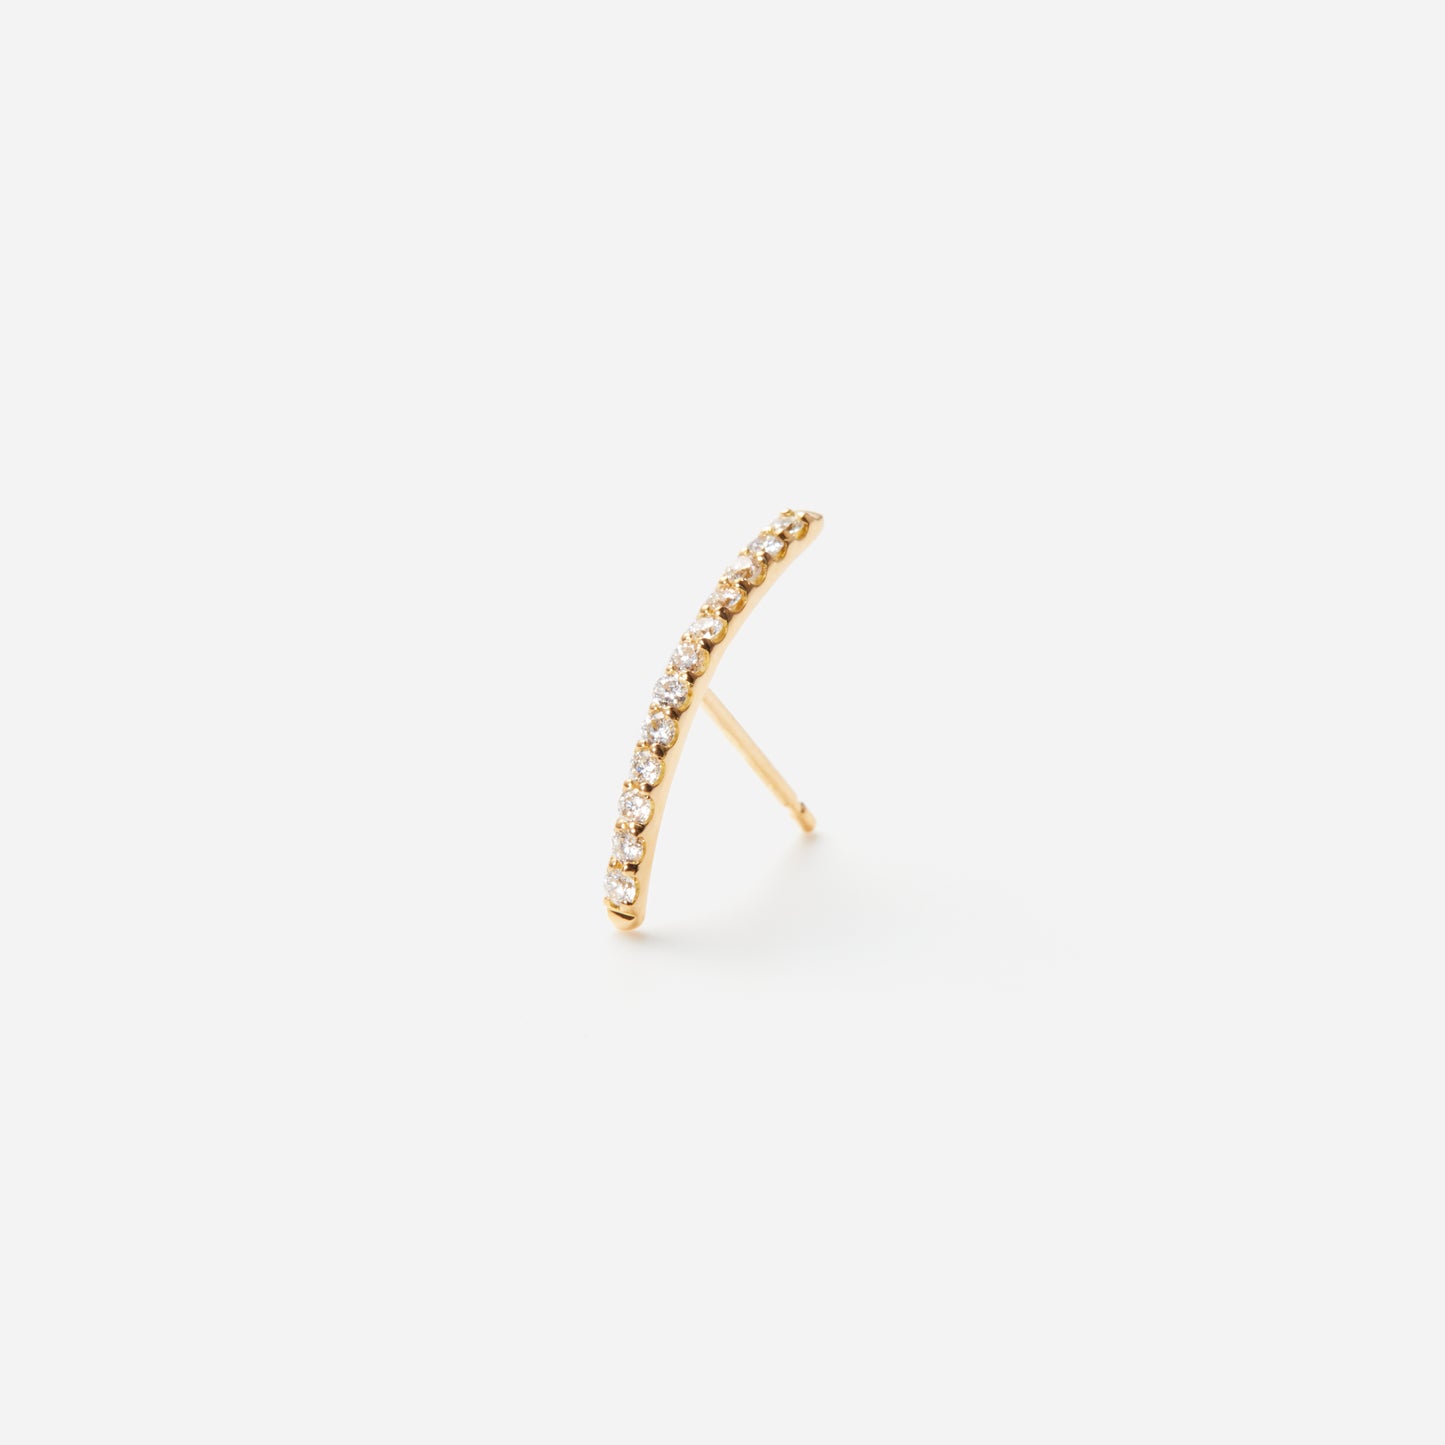 Linear Pireced earring "Smile small"